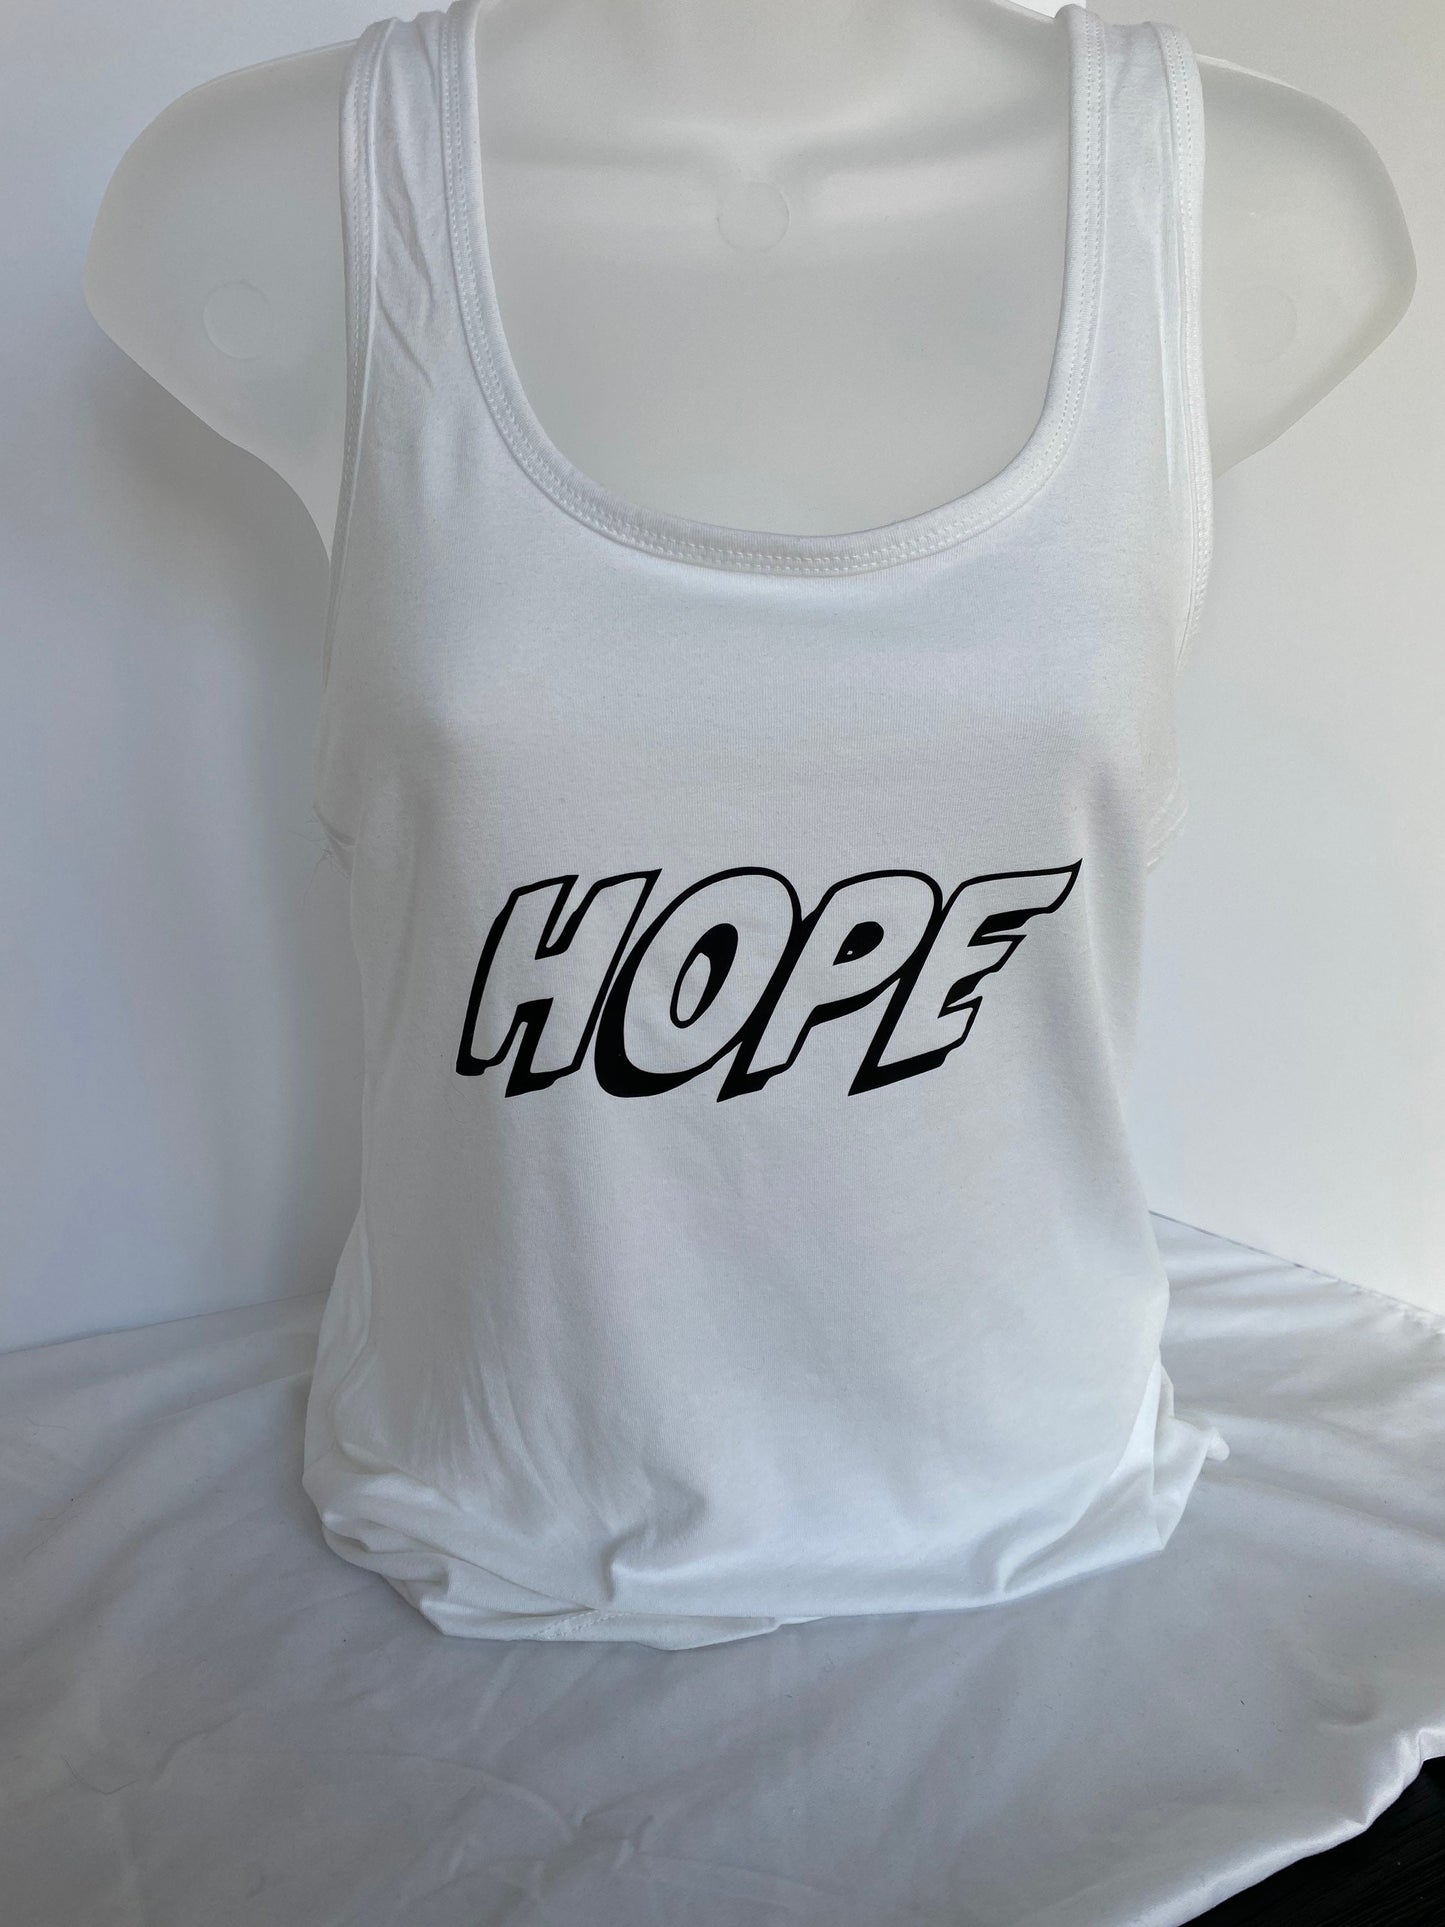 Hope Tank, T-shirt, Hoodie, or Tote, Positive Message, Inspirational Shirt